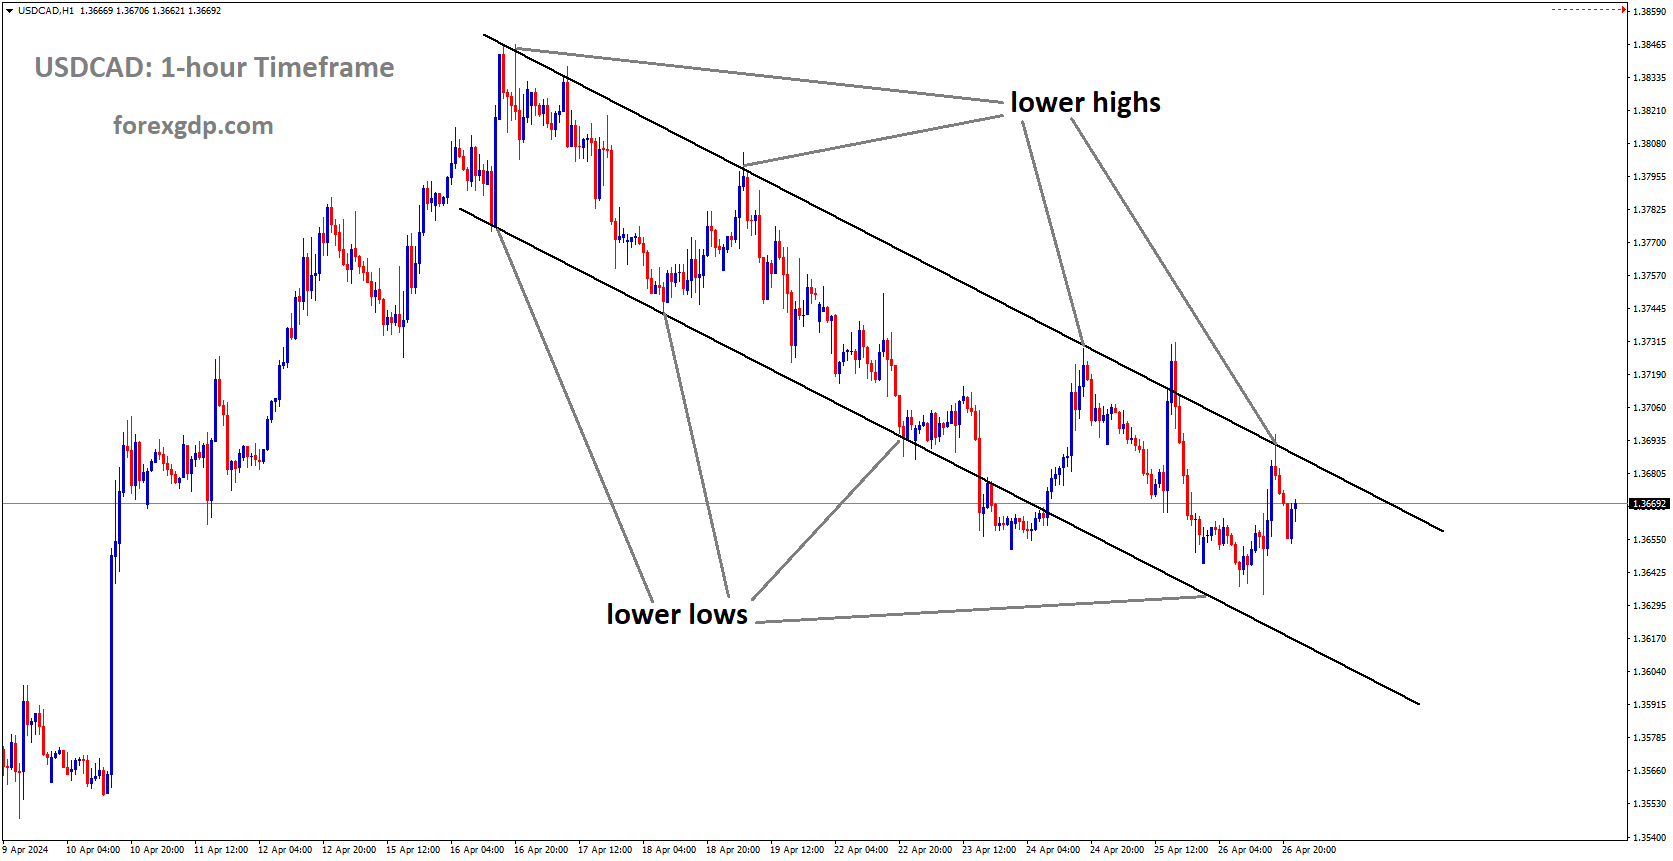 USDCAD is moving in Descending channel and market has fallen from the lower high area of the channel